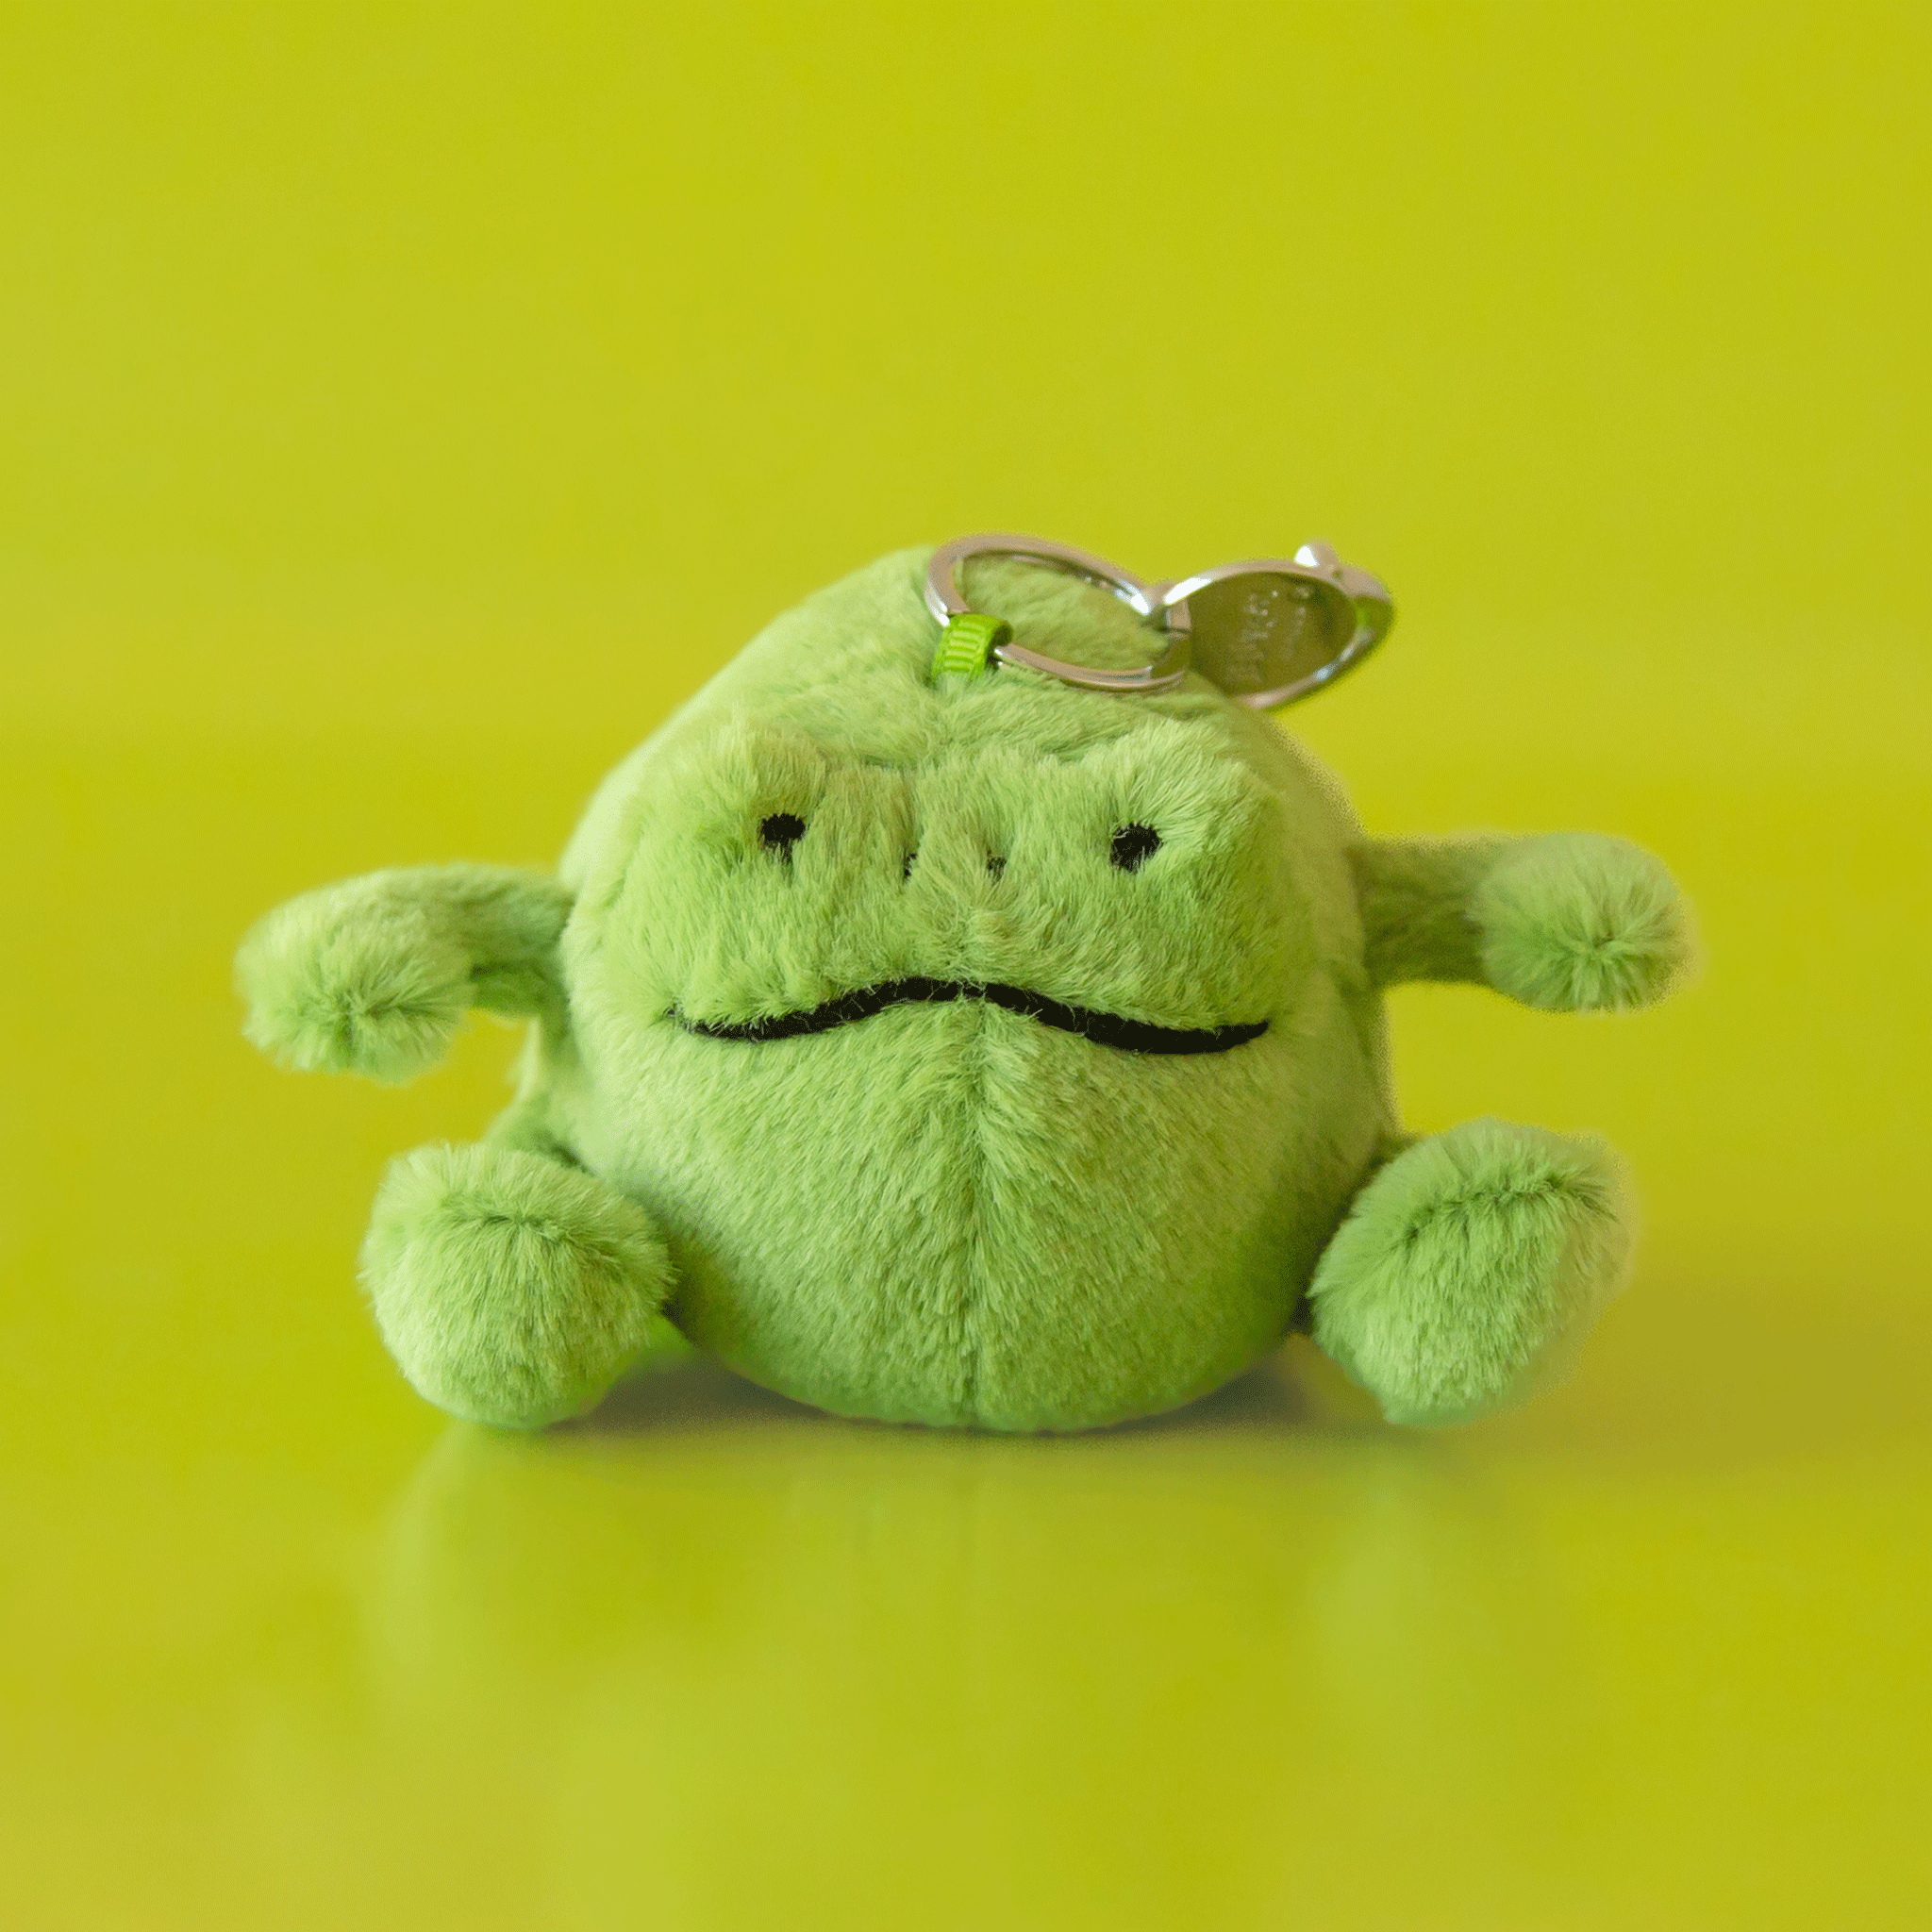 On a green background is a small green stuffed toy frog shaped bag charm.